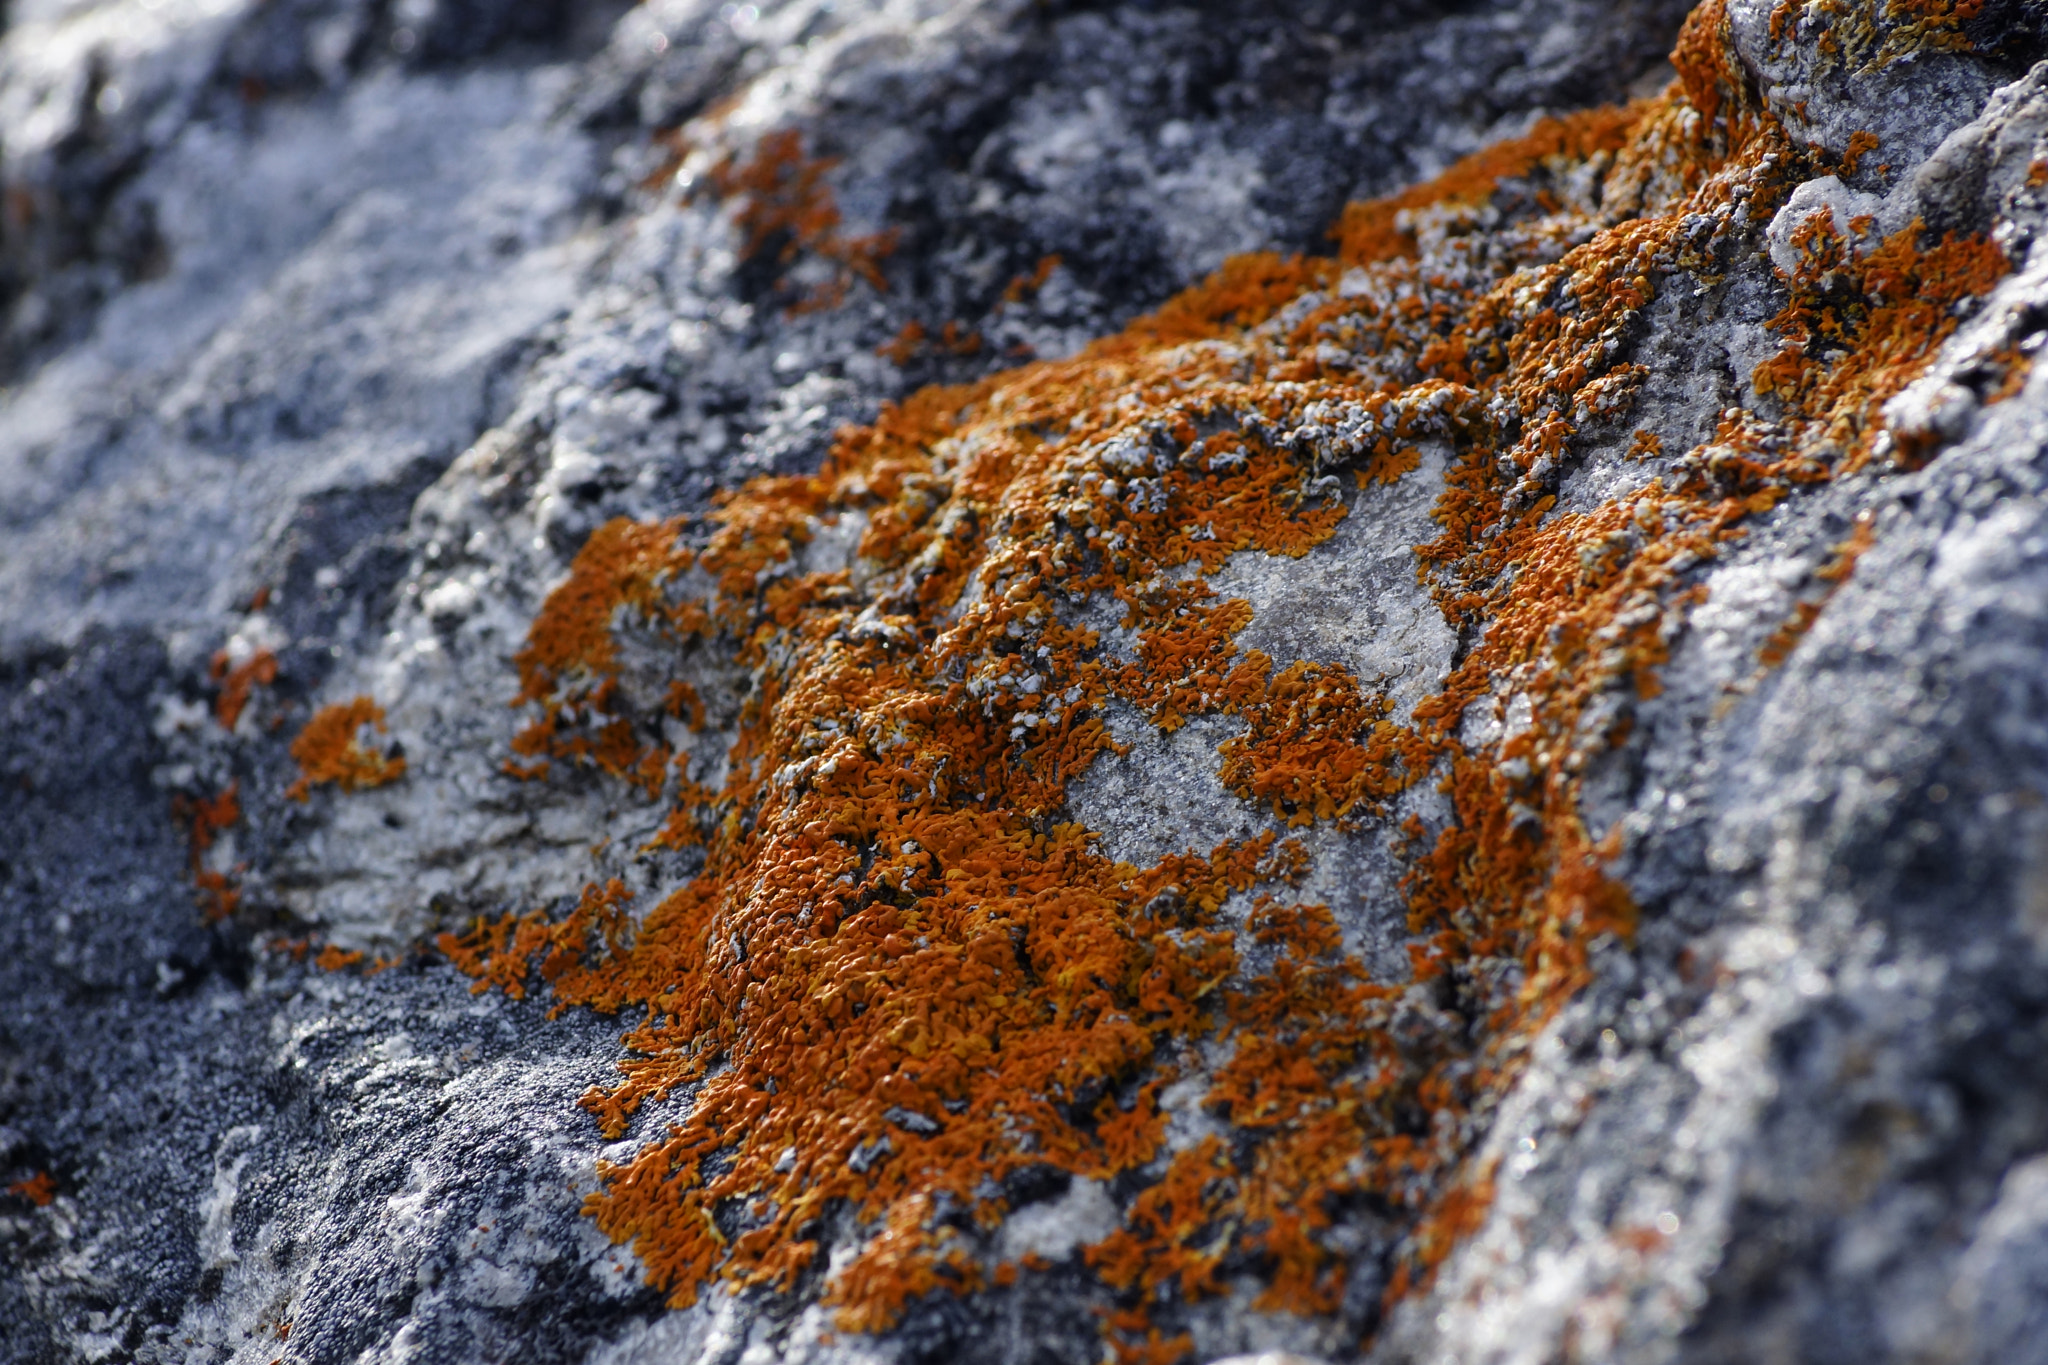 Sony SLT-A77 + Sony DT 55-200mm F4-5.6 SAM sample photo. The lichen photography